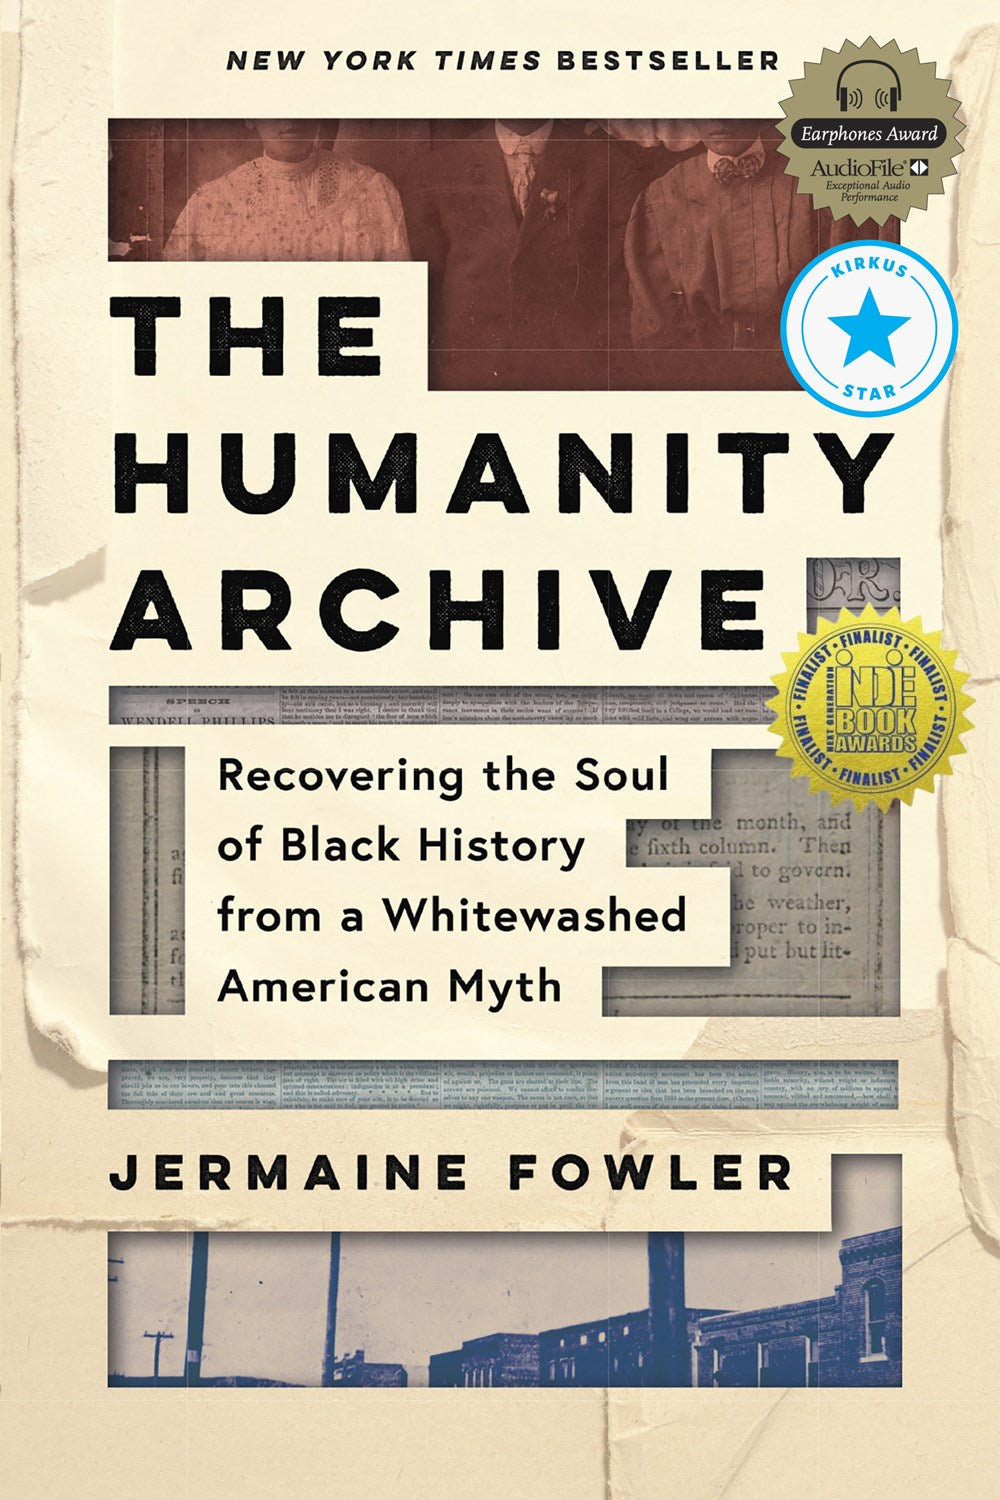 The Humanity Archive: Recovering the Soul of Black History from a Whitewashed American Myth by Jermaine Fowler